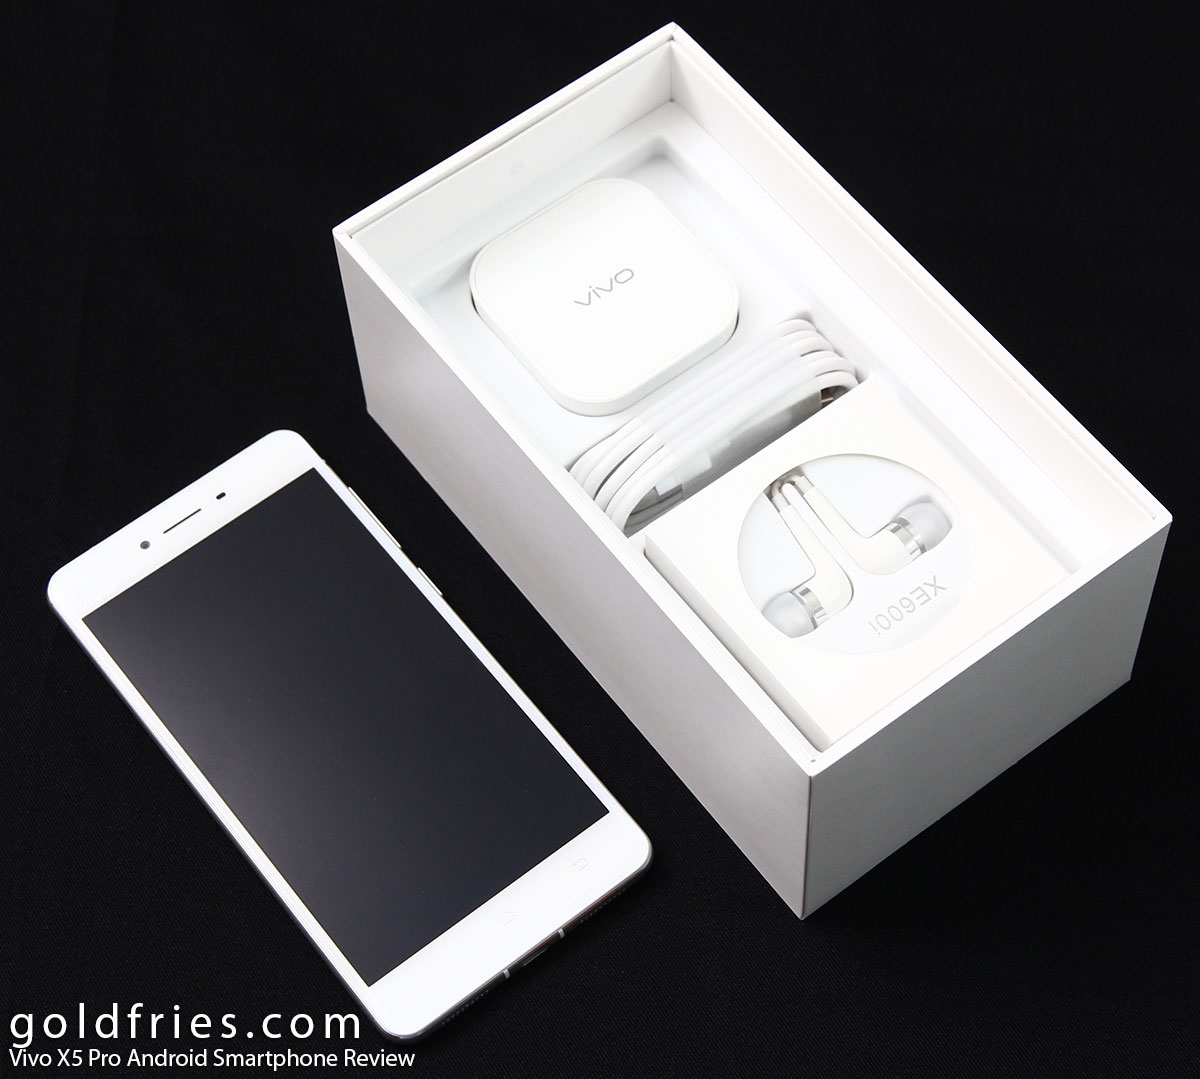 Vivo X5 Pro Android Smartphone Review